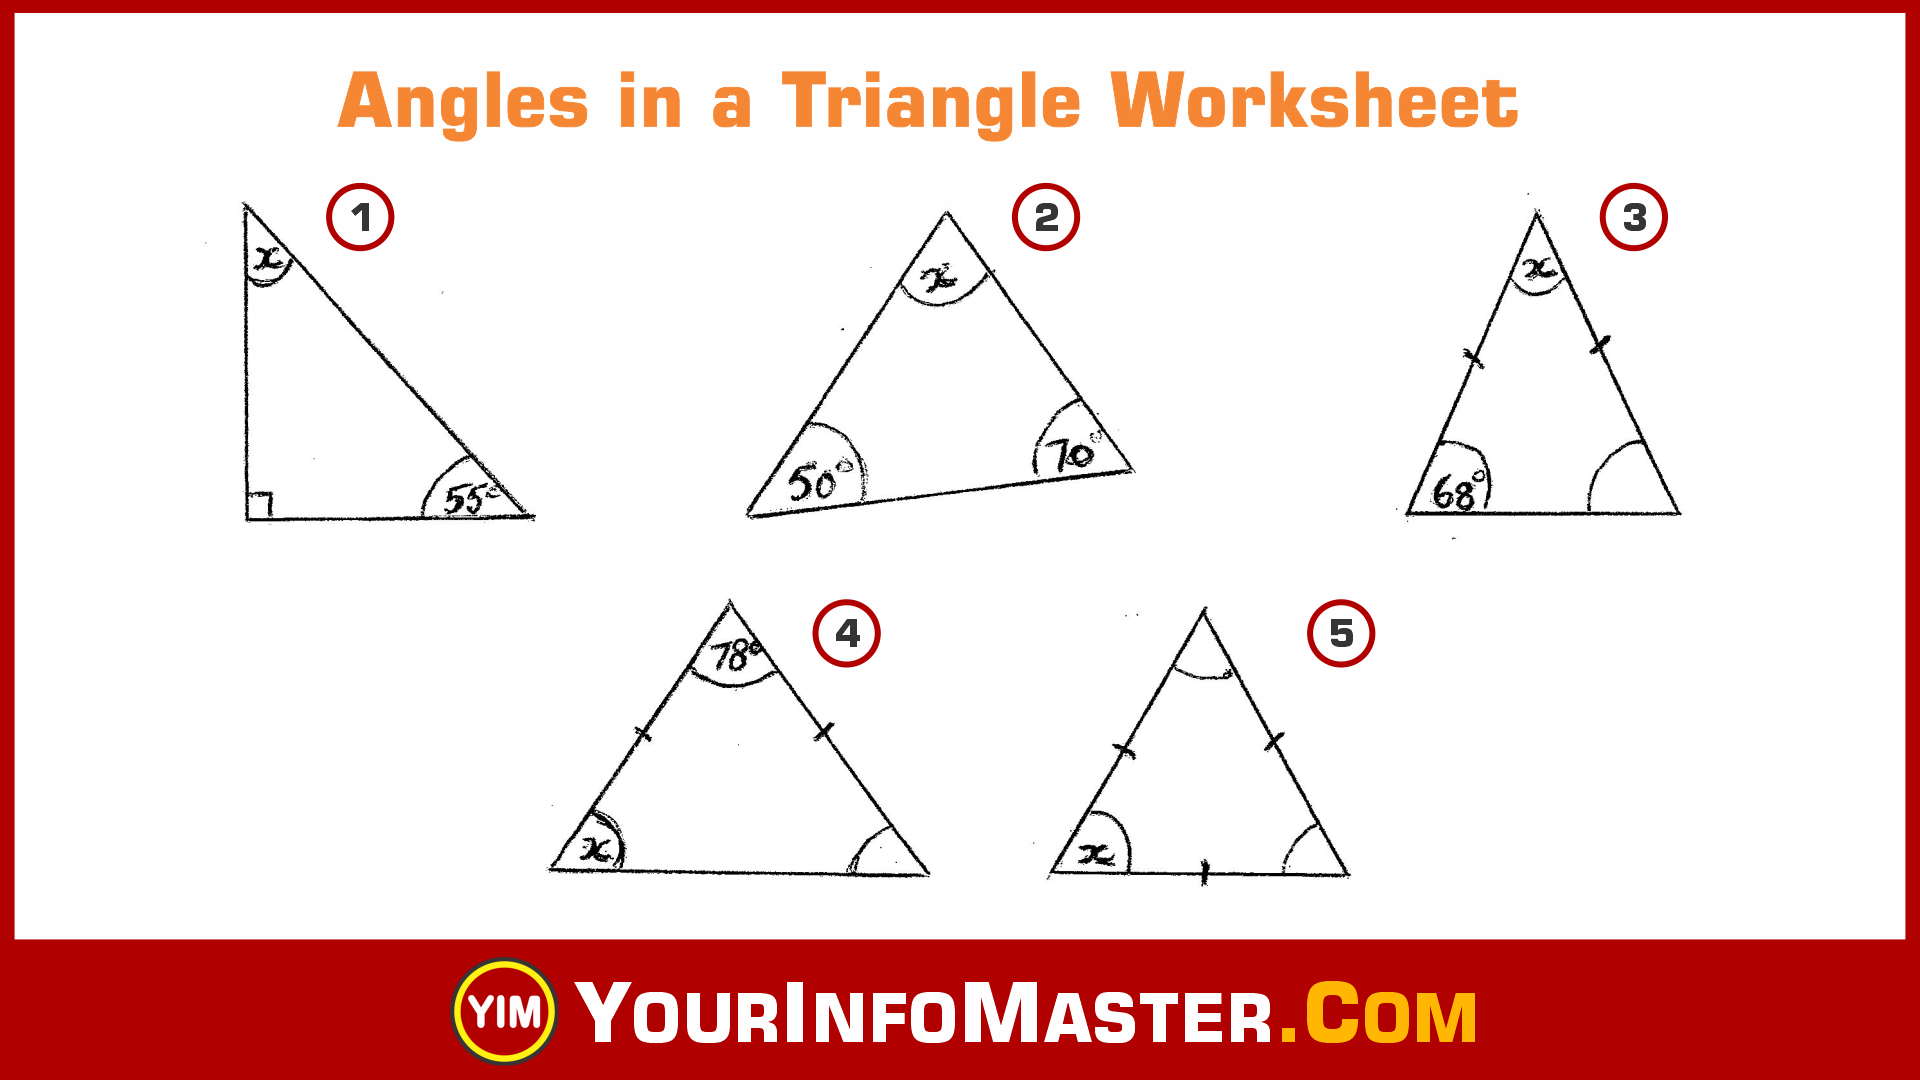 Angles in a Triangle Worksheet - Your Info Master Pertaining To Angles In A Triangle Worksheet